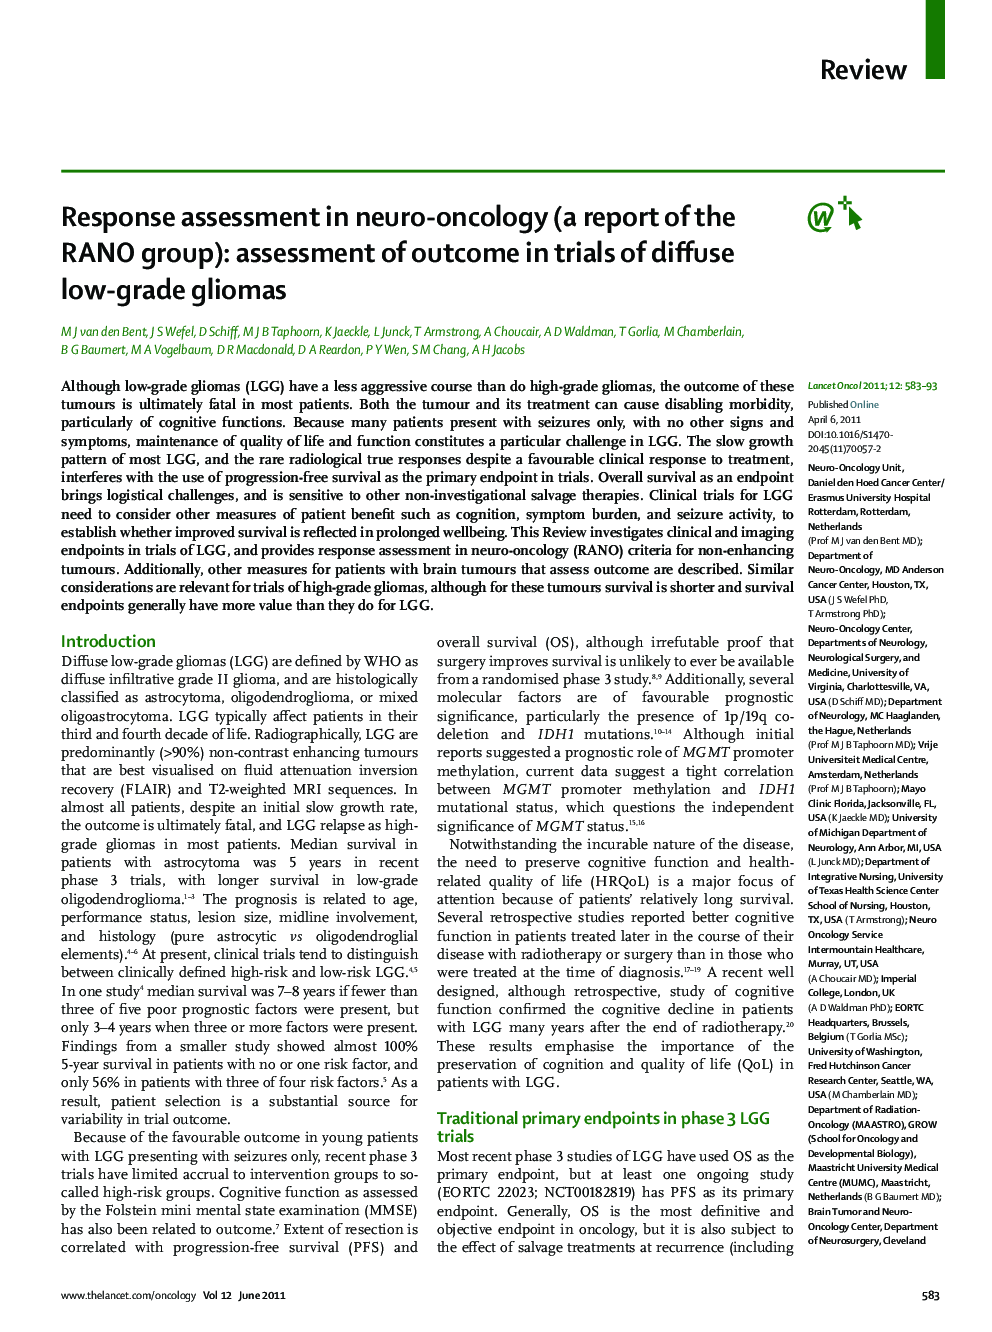 Response assessment in neuro-oncology (a report of the RANO group): assessment of outcome in trials of diffuse low-grade gliomas